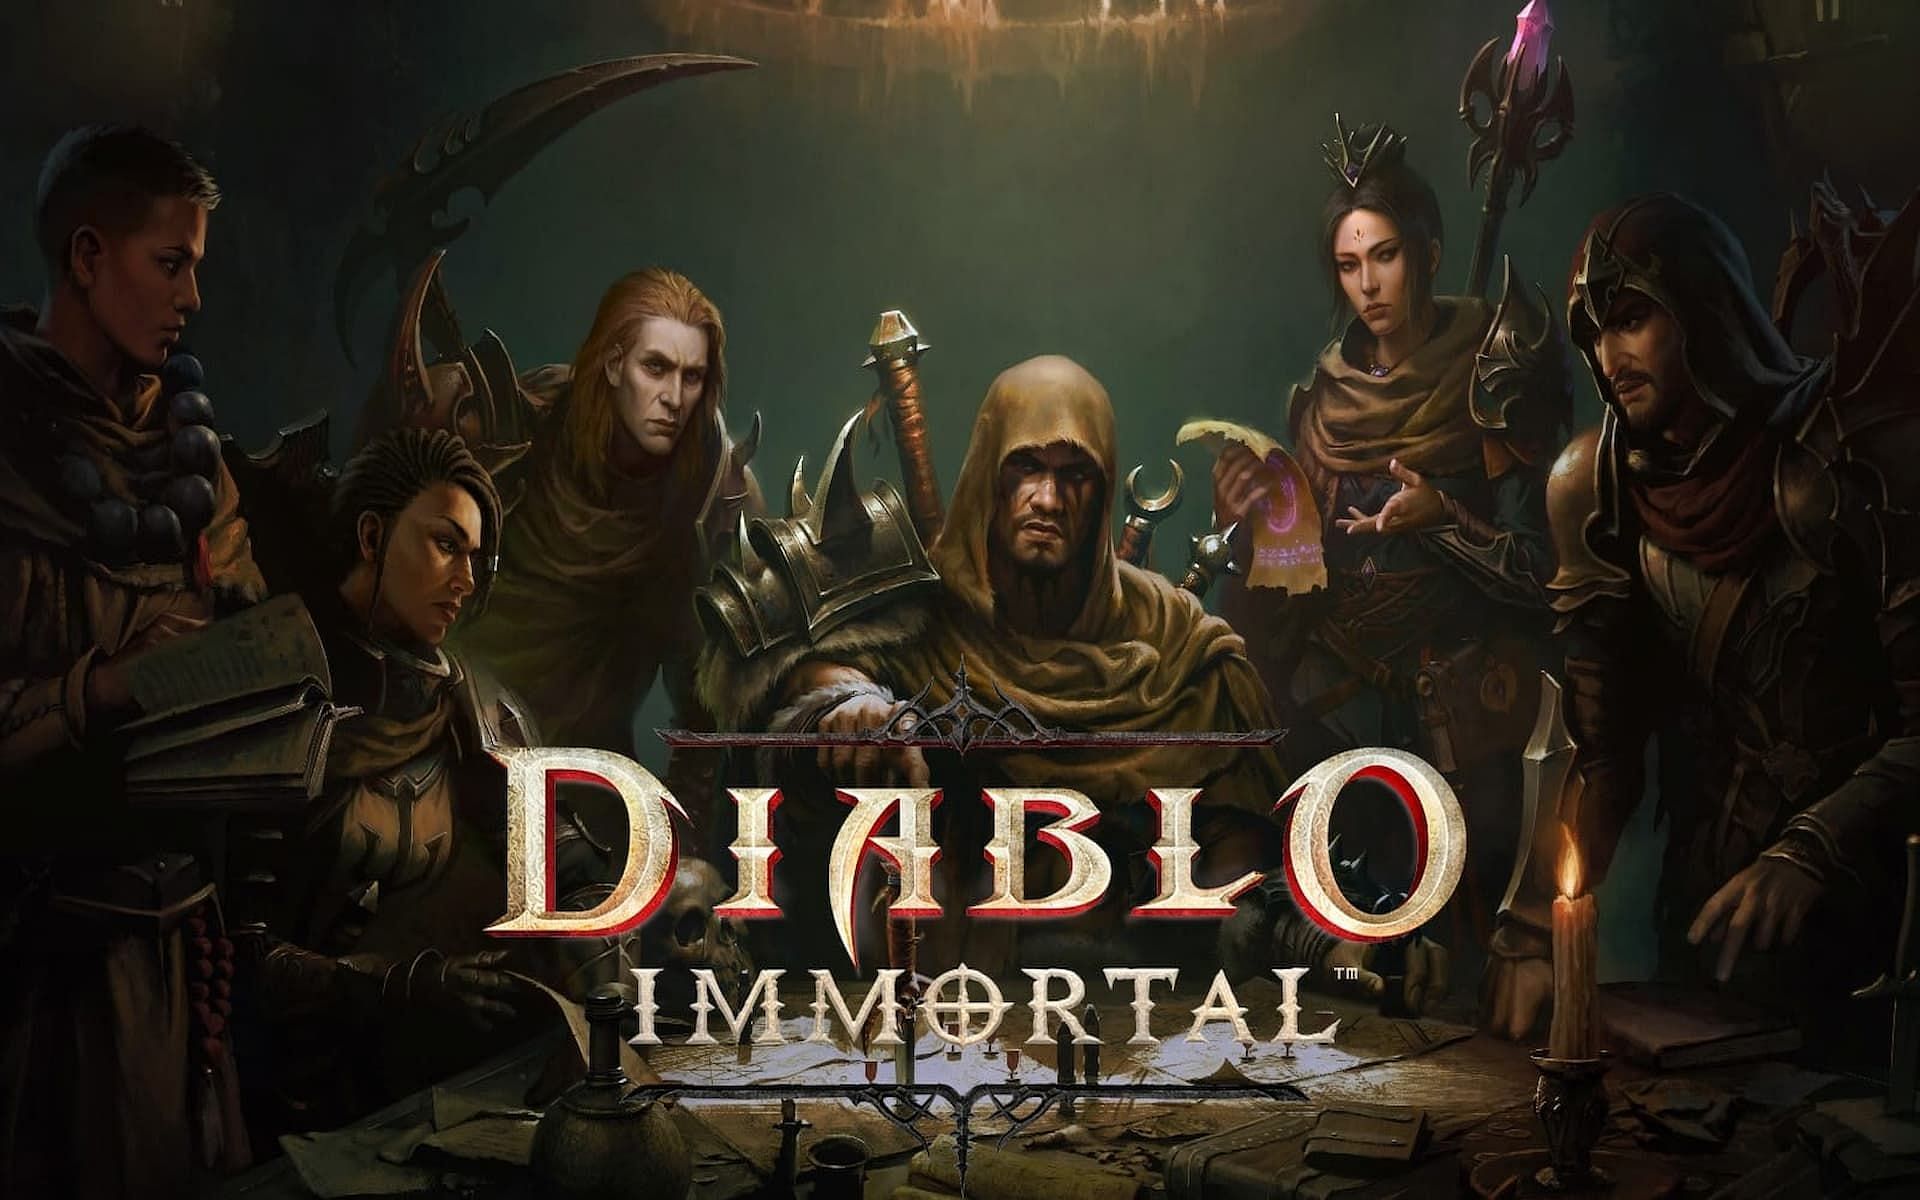 Diablo Immortal Pay-To-Win Disaster - KeenGamer